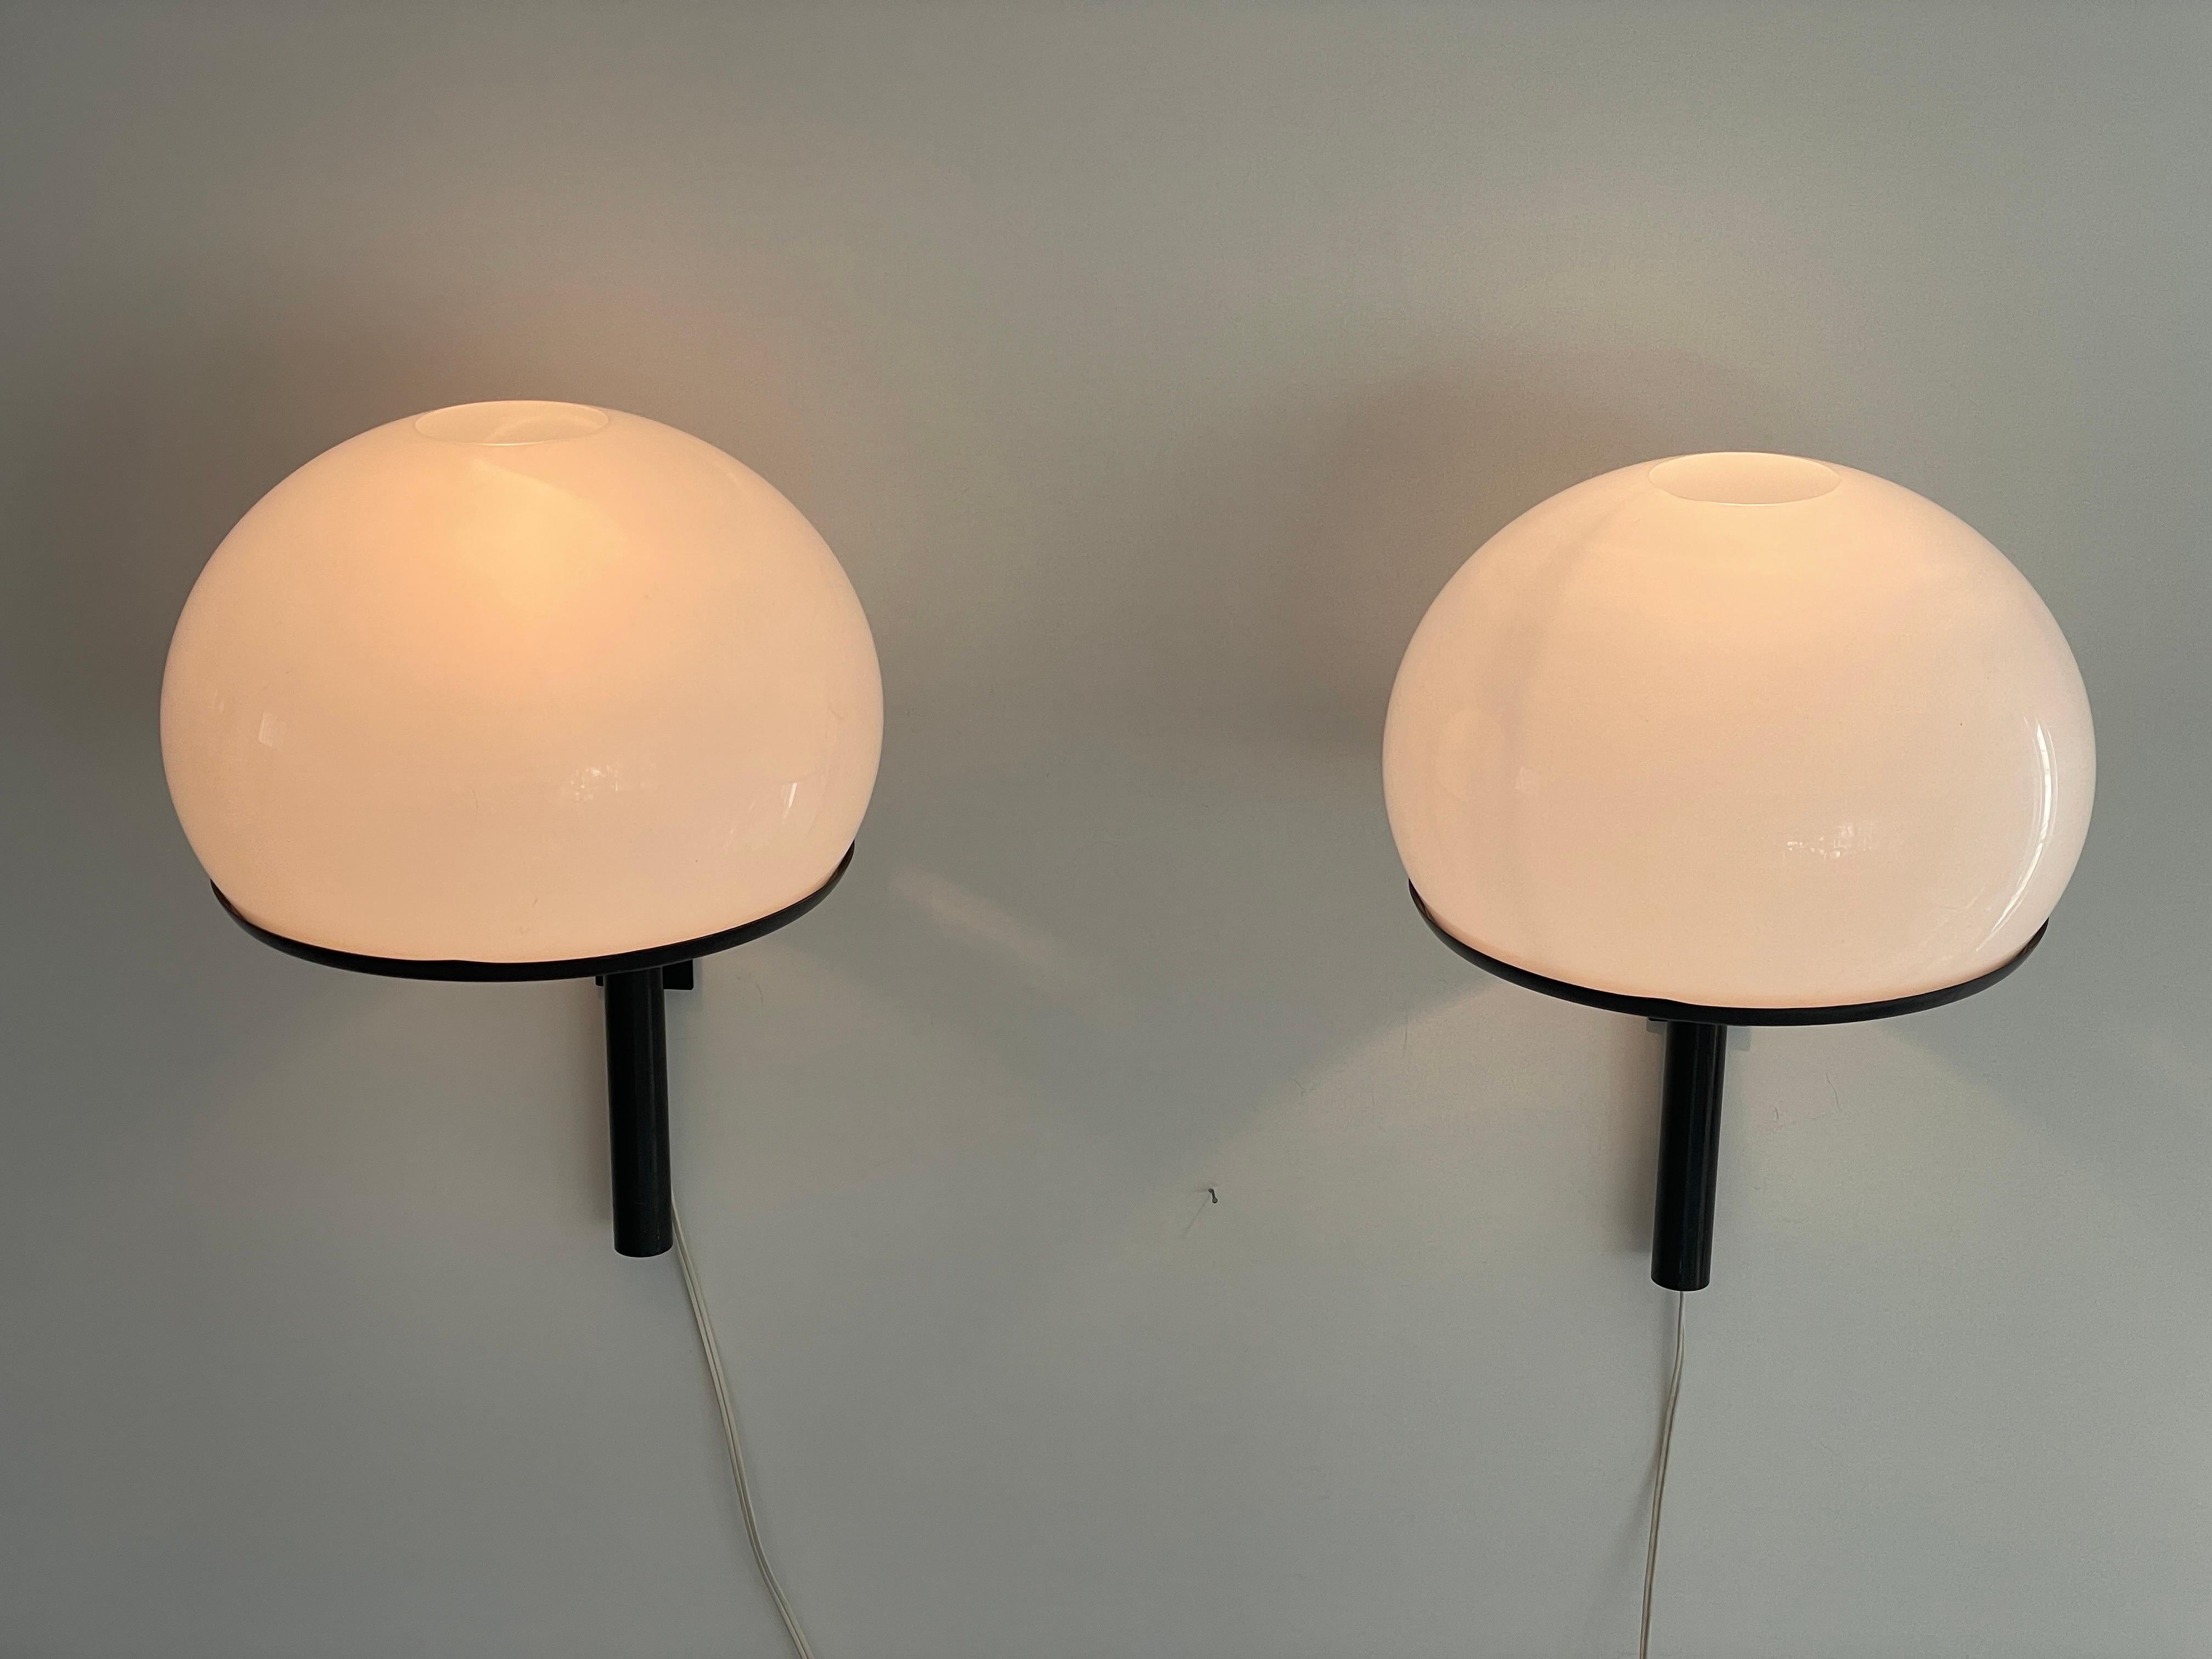 White Acrylic Pair of Large Sconces by Arteluce, Italy, 1960s For Sale 4